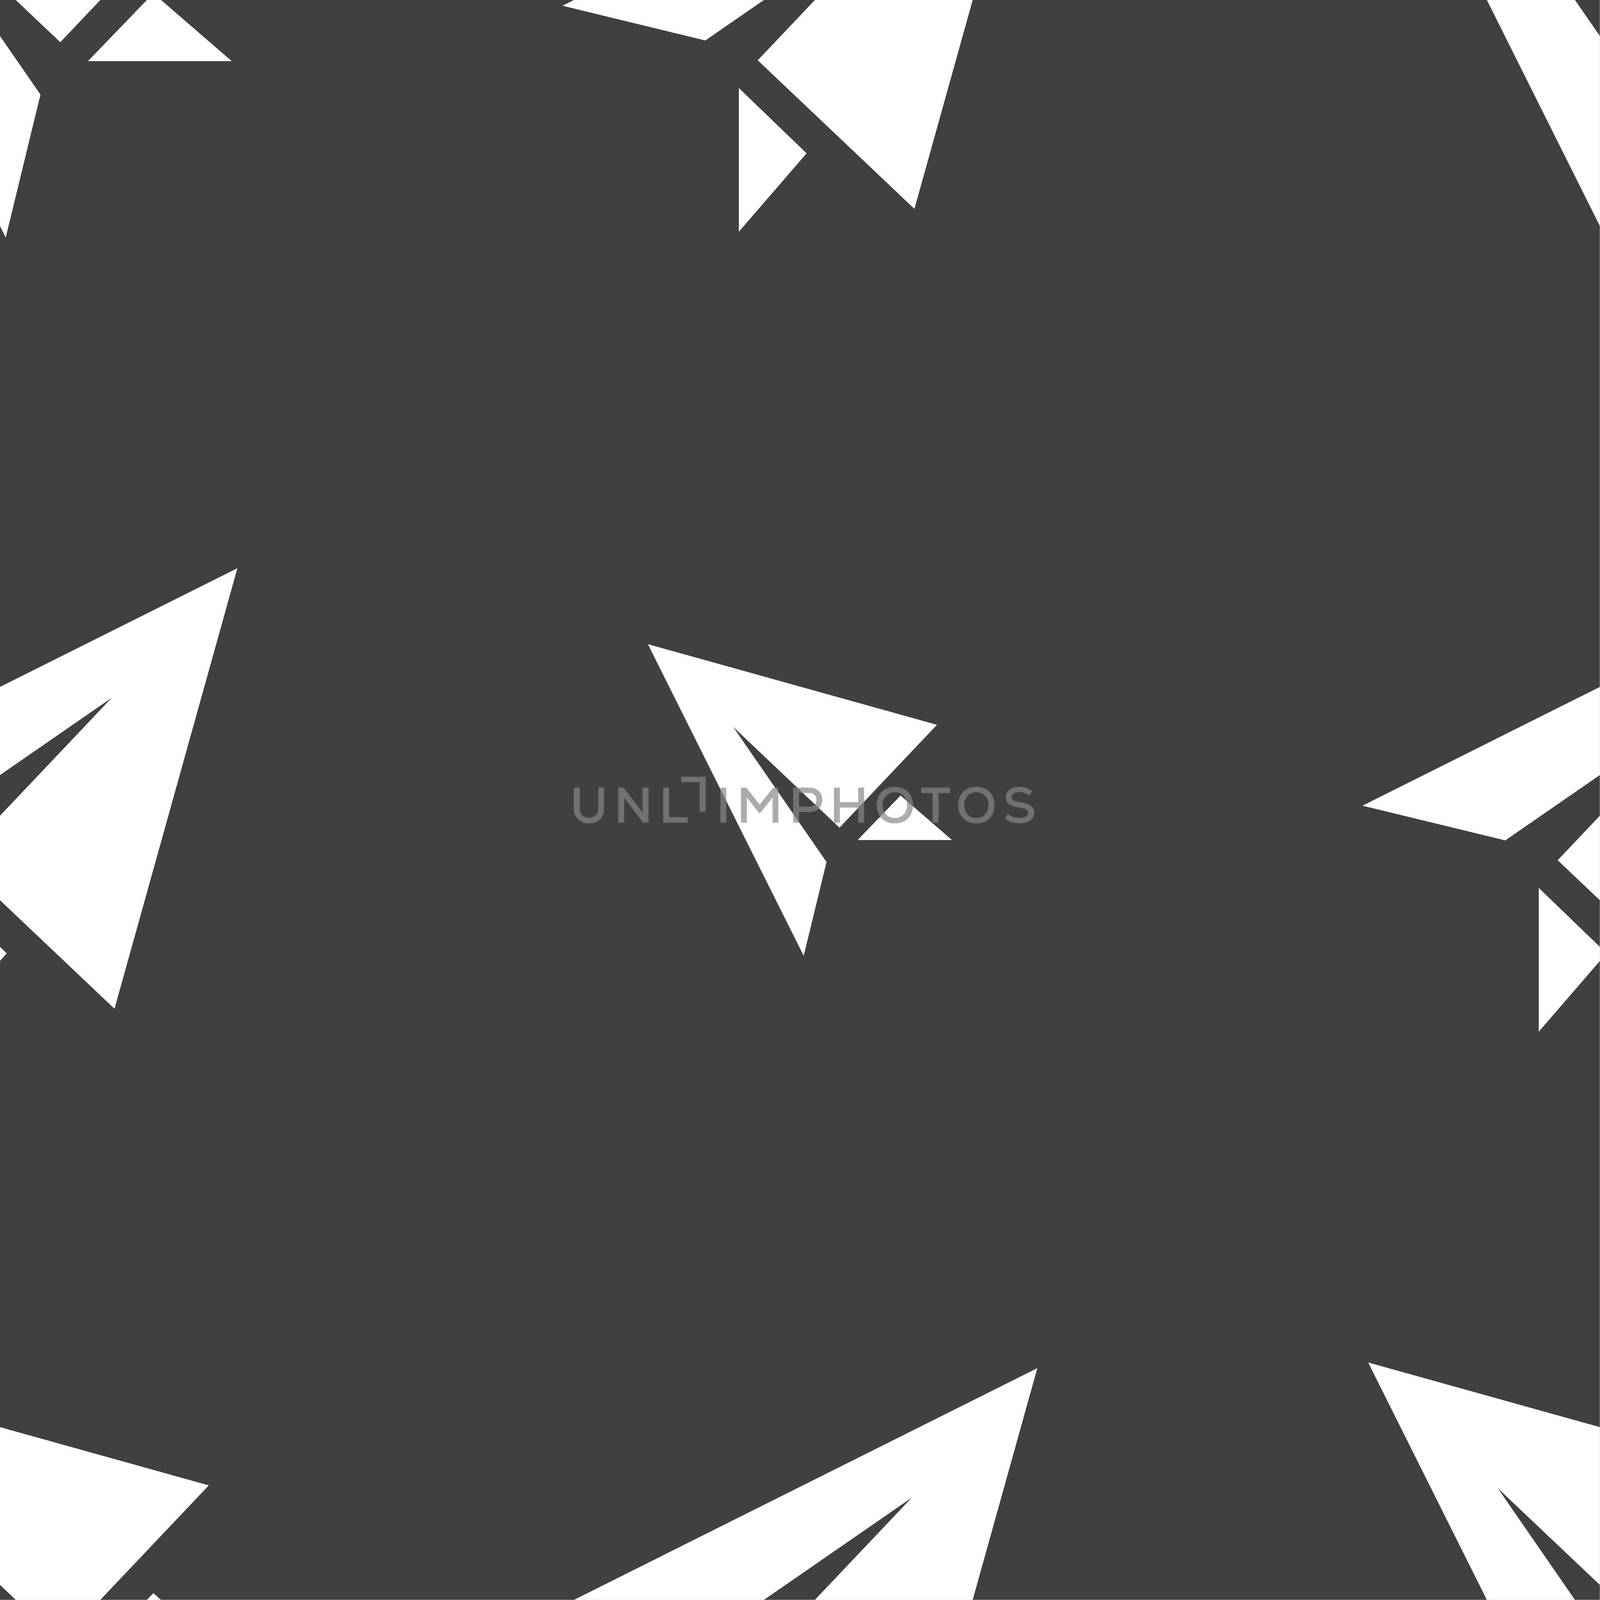 Paper airplane icon sign. Seamless pattern on a gray background. illustration